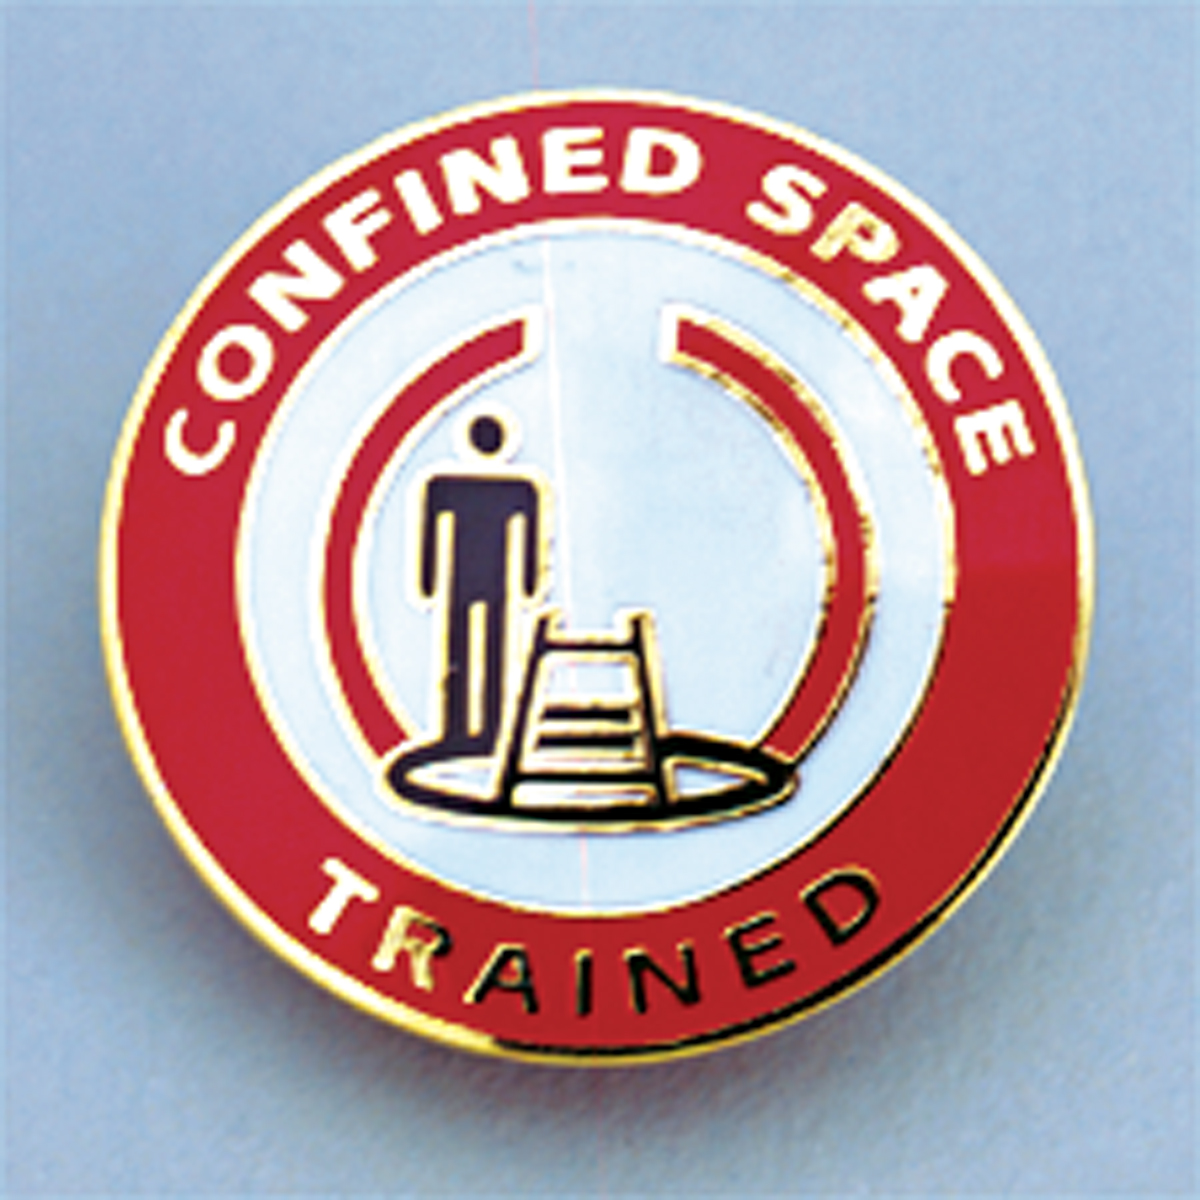 CONFINED SPACE TRAINED